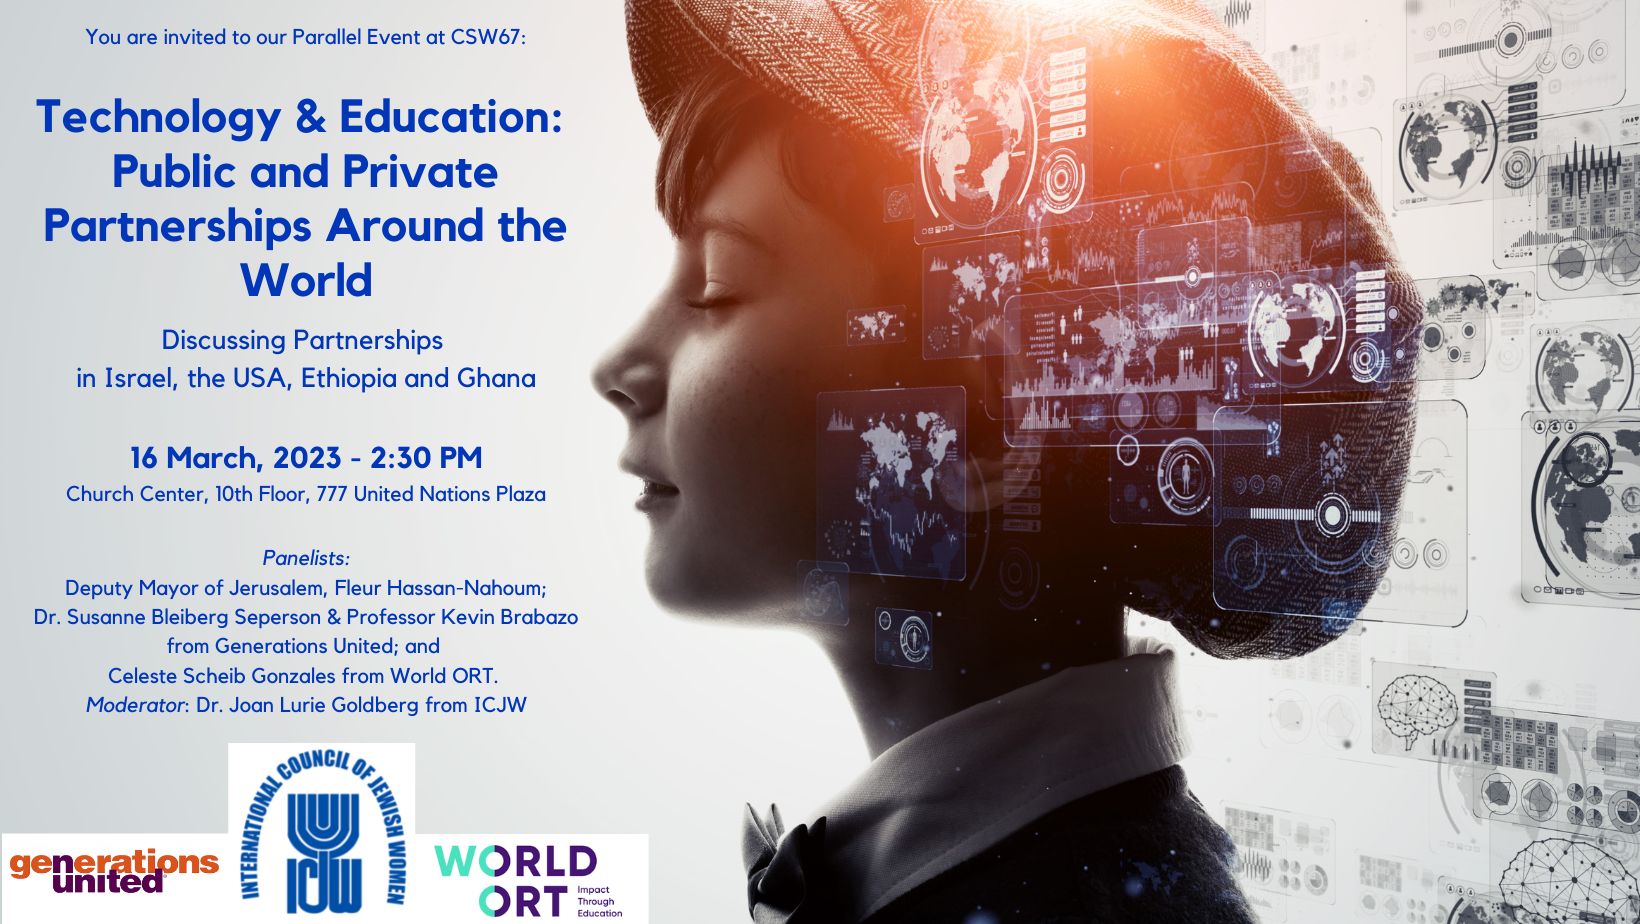 Technology & Education: Public and Private Partnerships Around the World